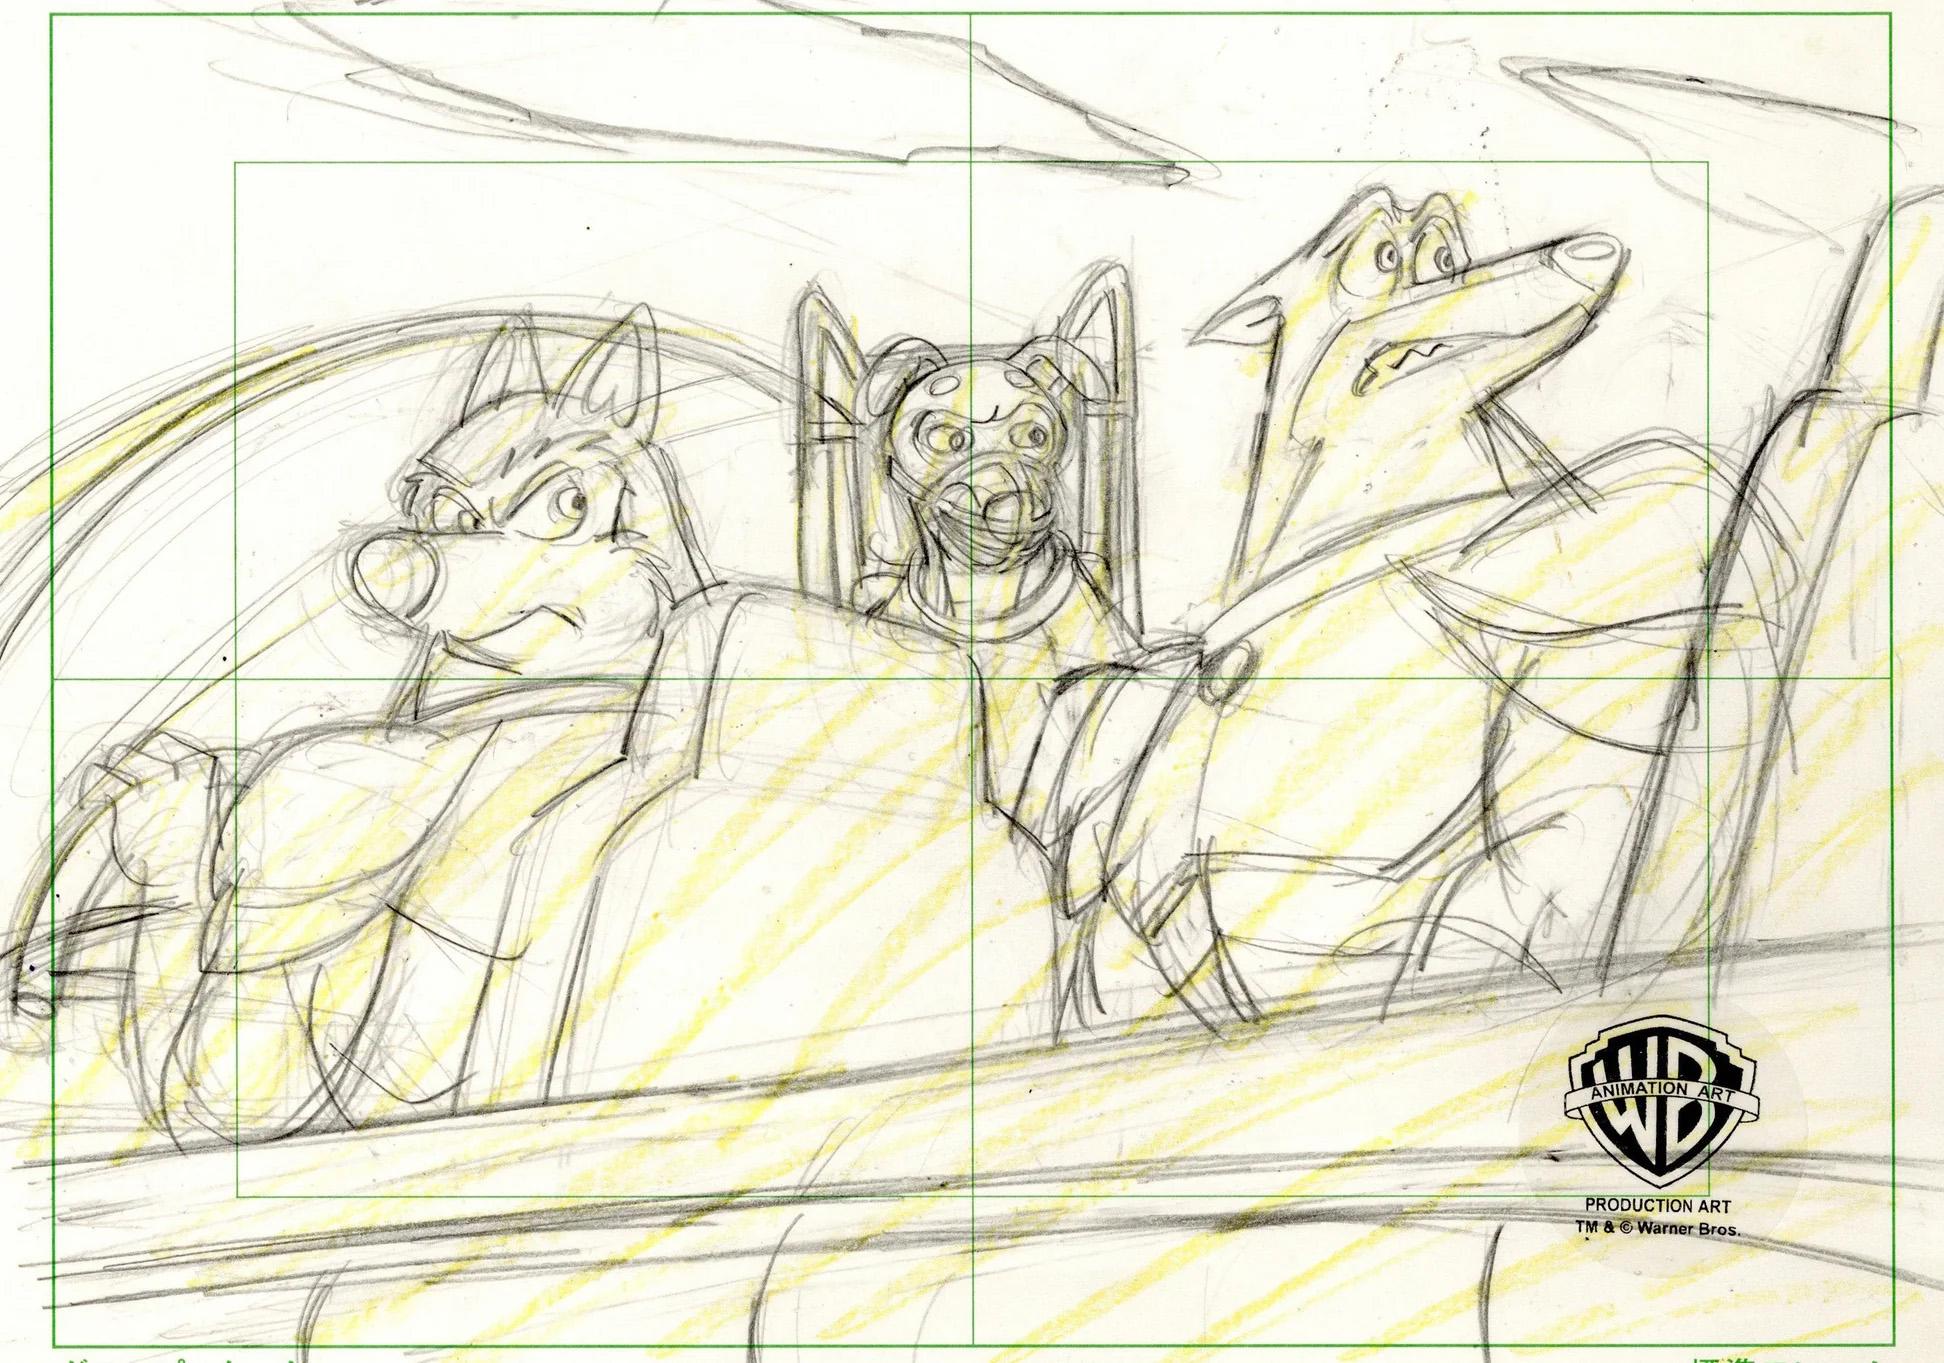 Road Rovers Original Production Layout Drawing: Blitz, Exile, and Muzzle - Art by Warner Bros. Studio Artists